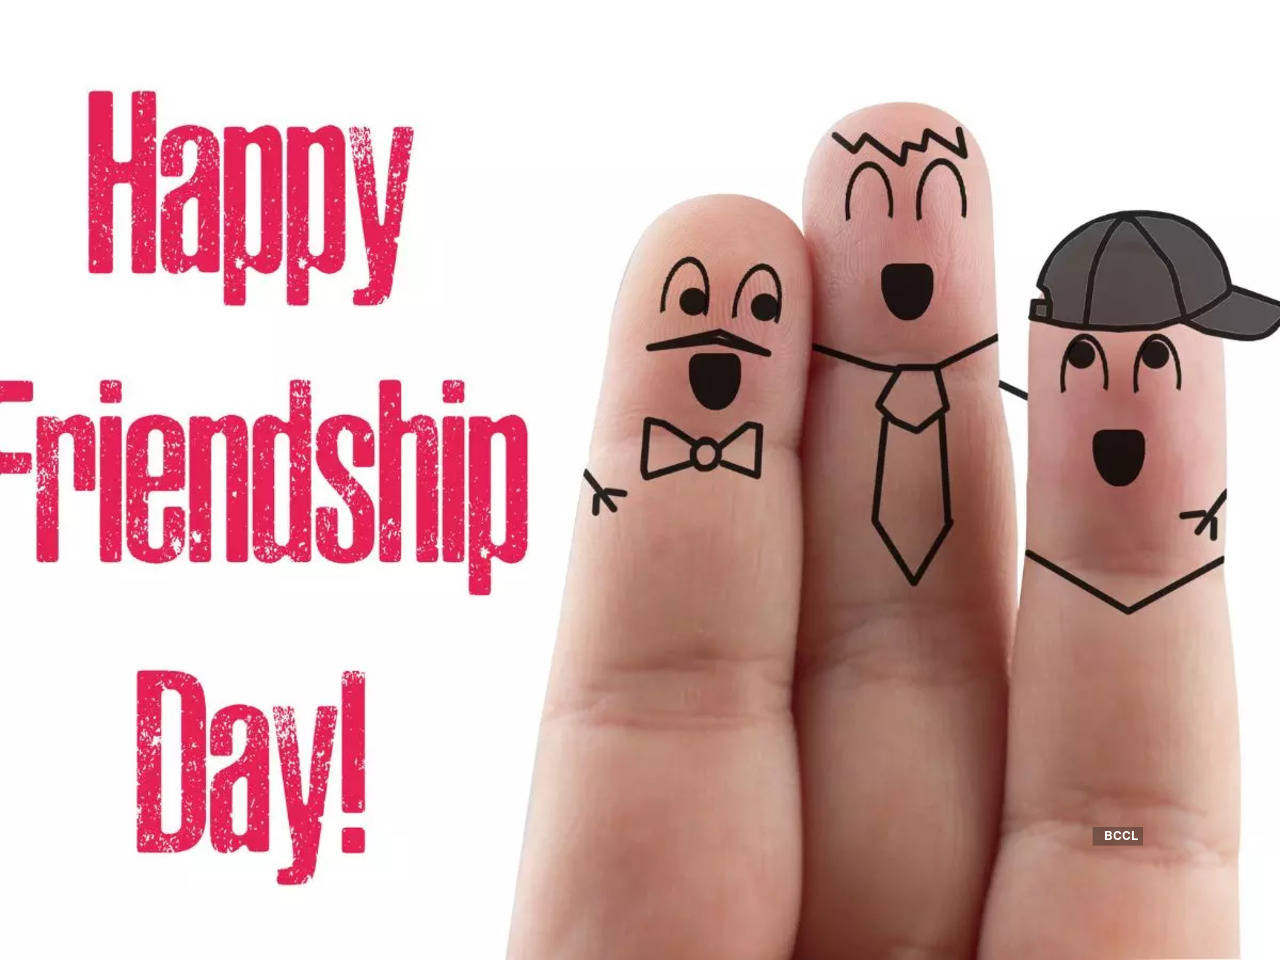 Friendship Day Images, Greeting Cards, Wishes, Quotes: Happy